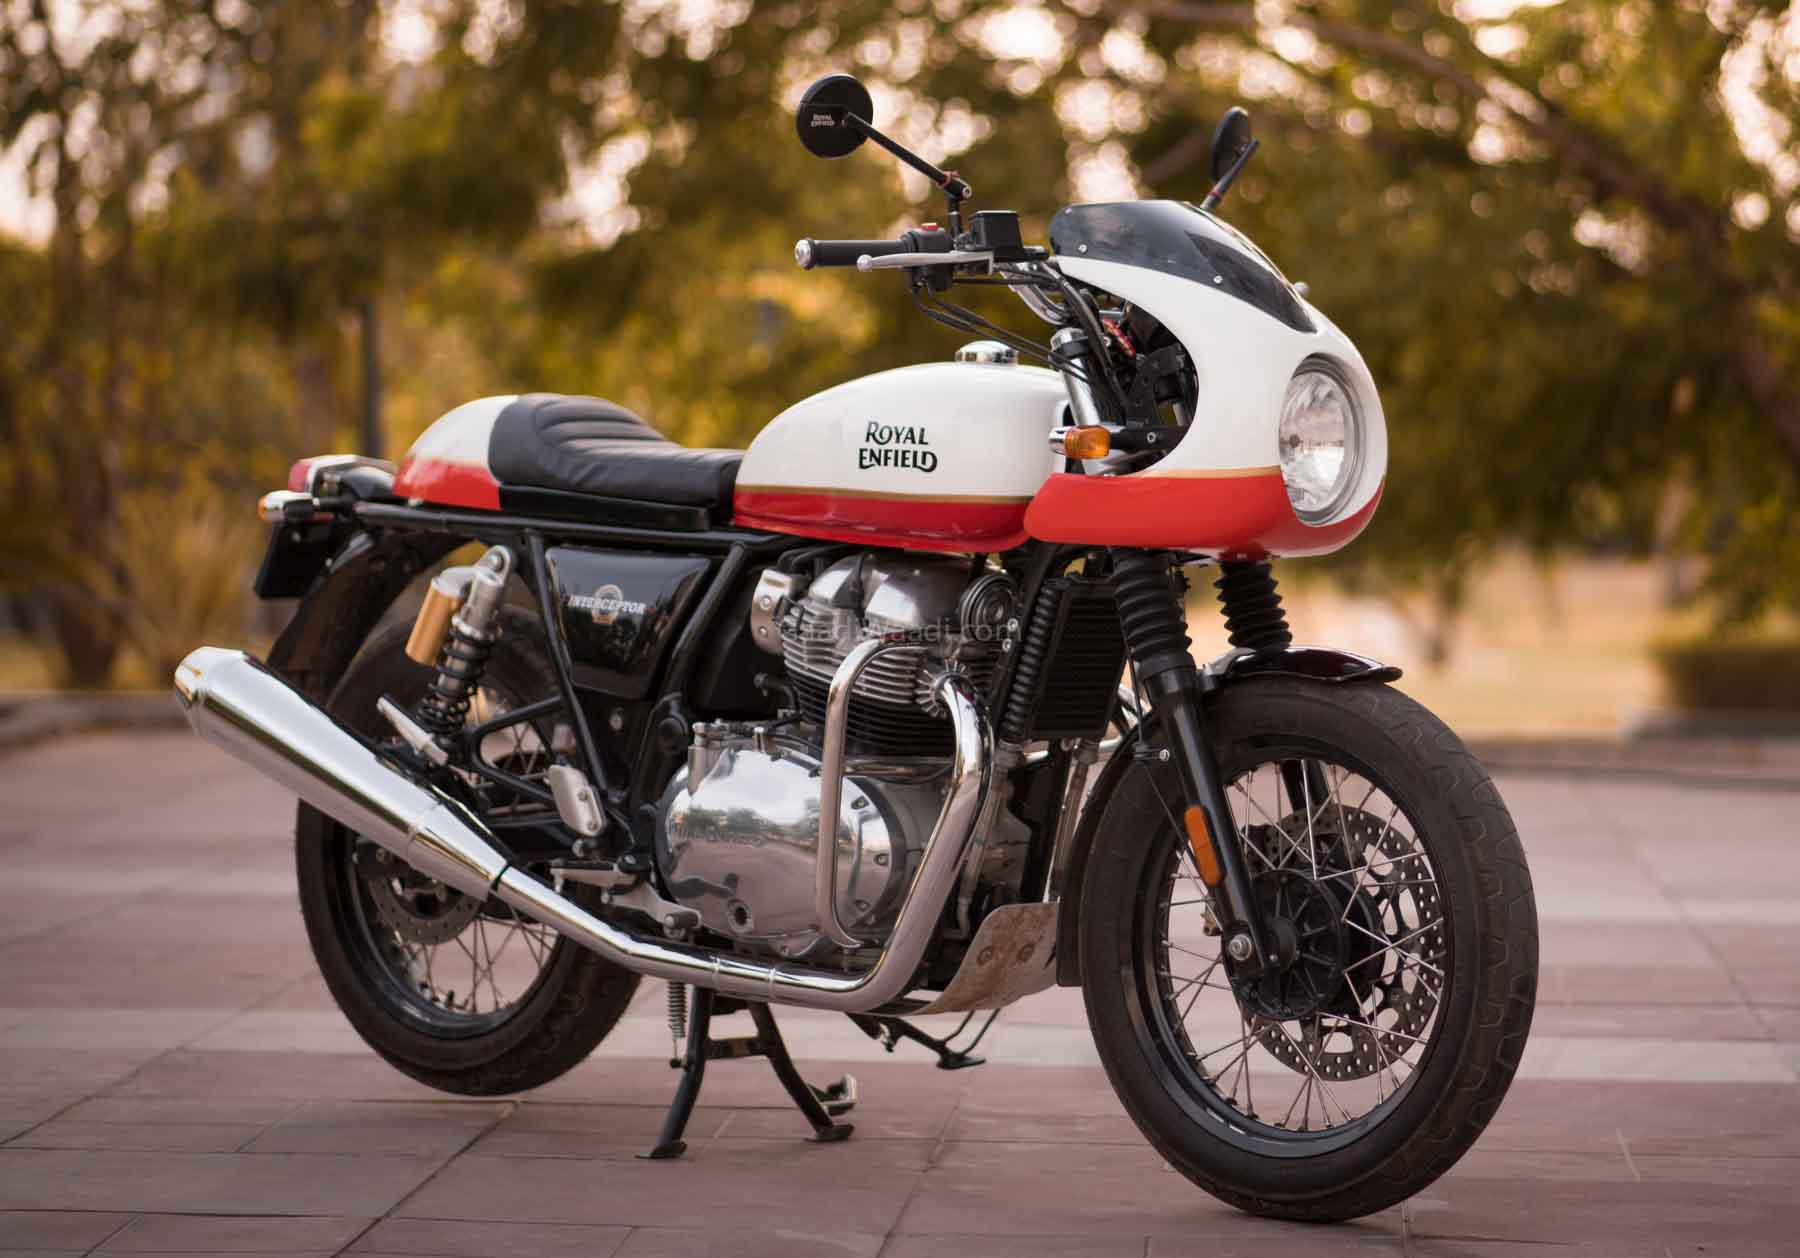 RE Interceptor 650 Converted Into A Retro Cafe Racer, Looks Exceptional